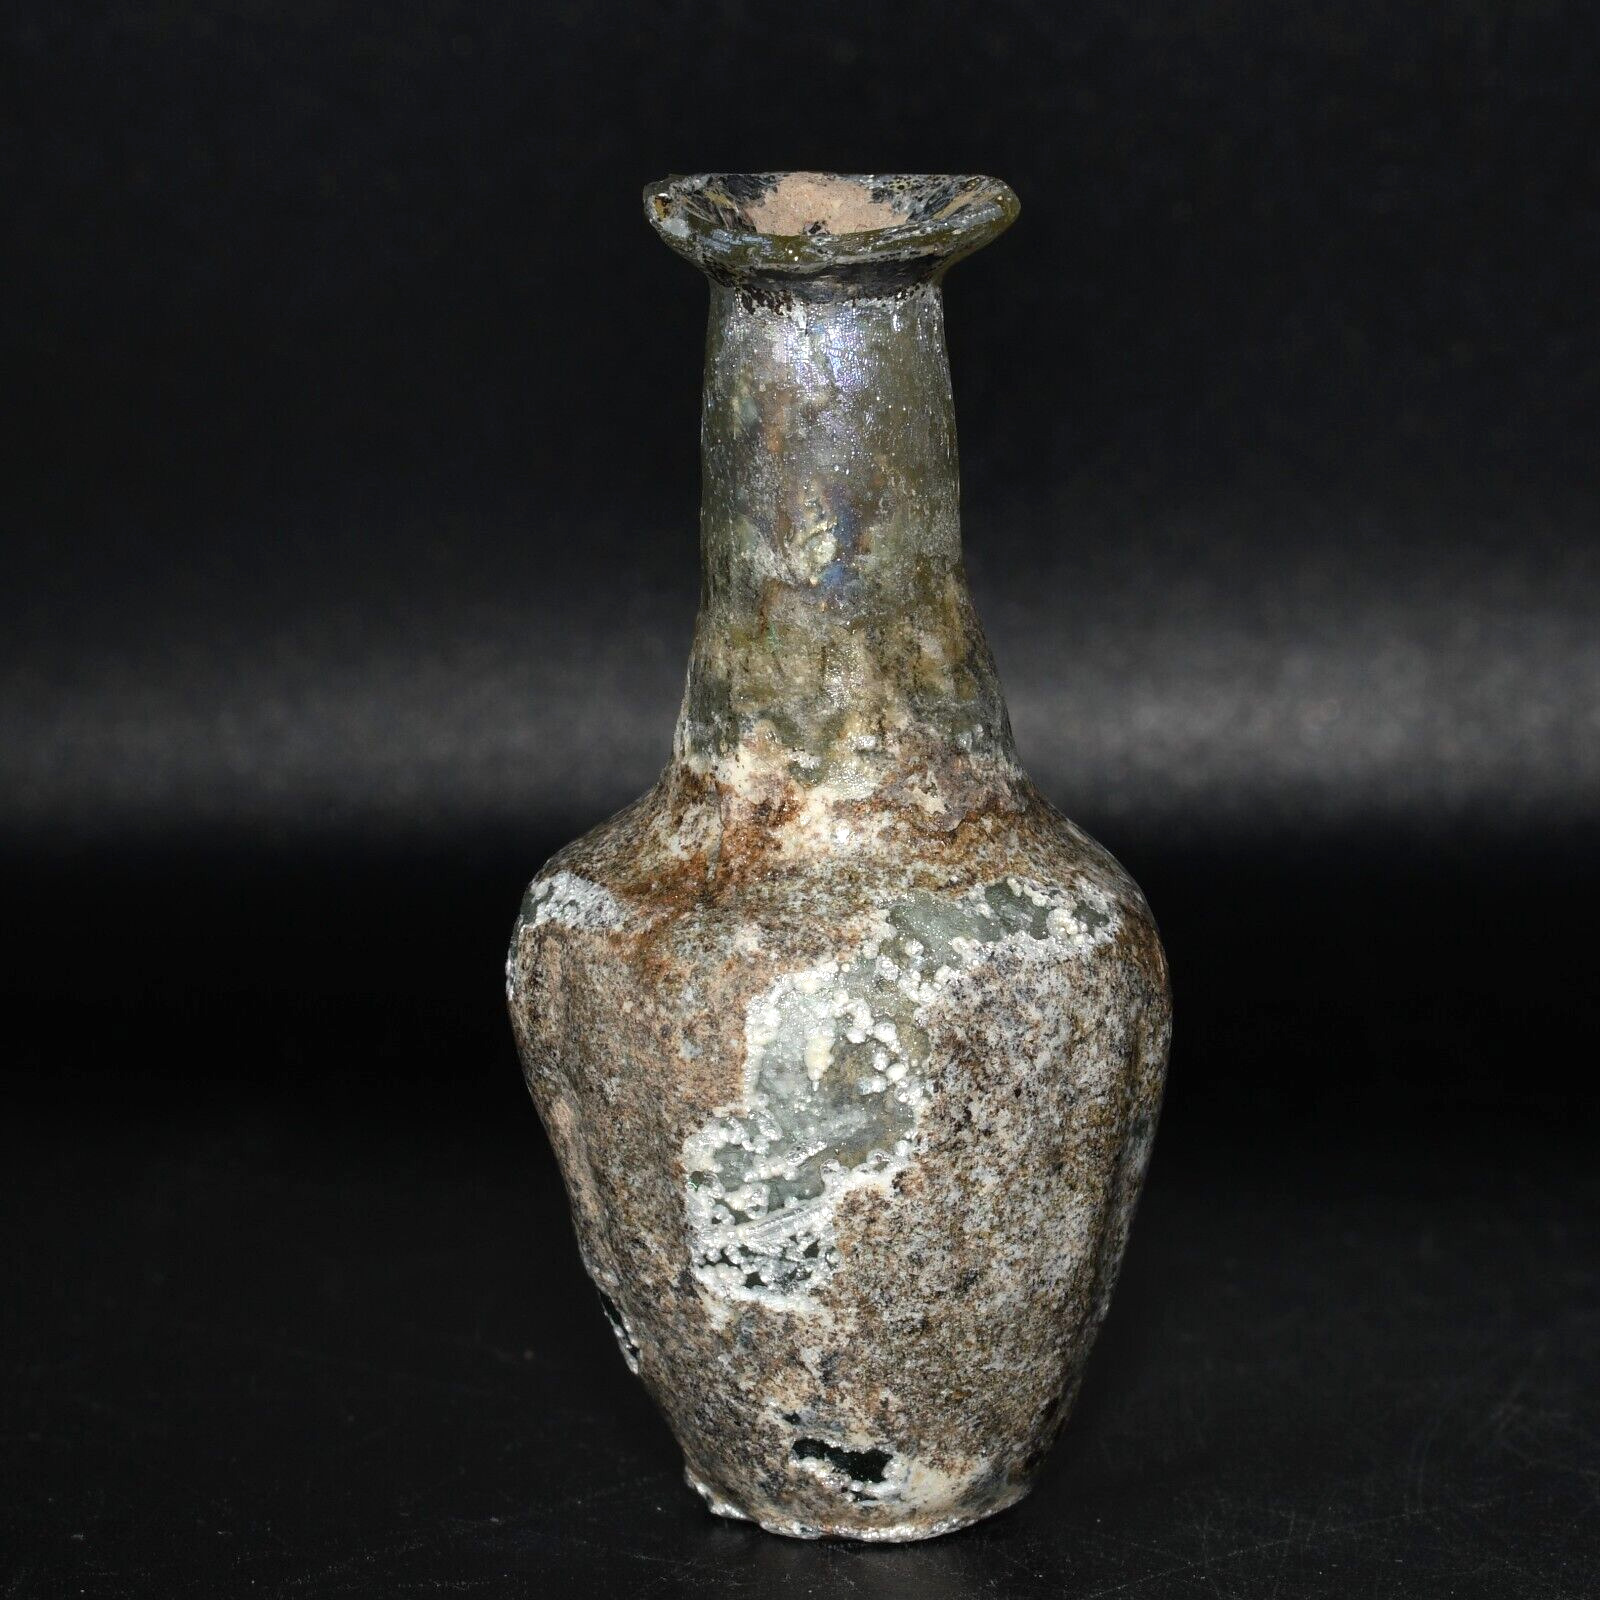 Genuine Ancient Roman Glass Vial Bottle with Golden Patina Circa 3rd Century AD